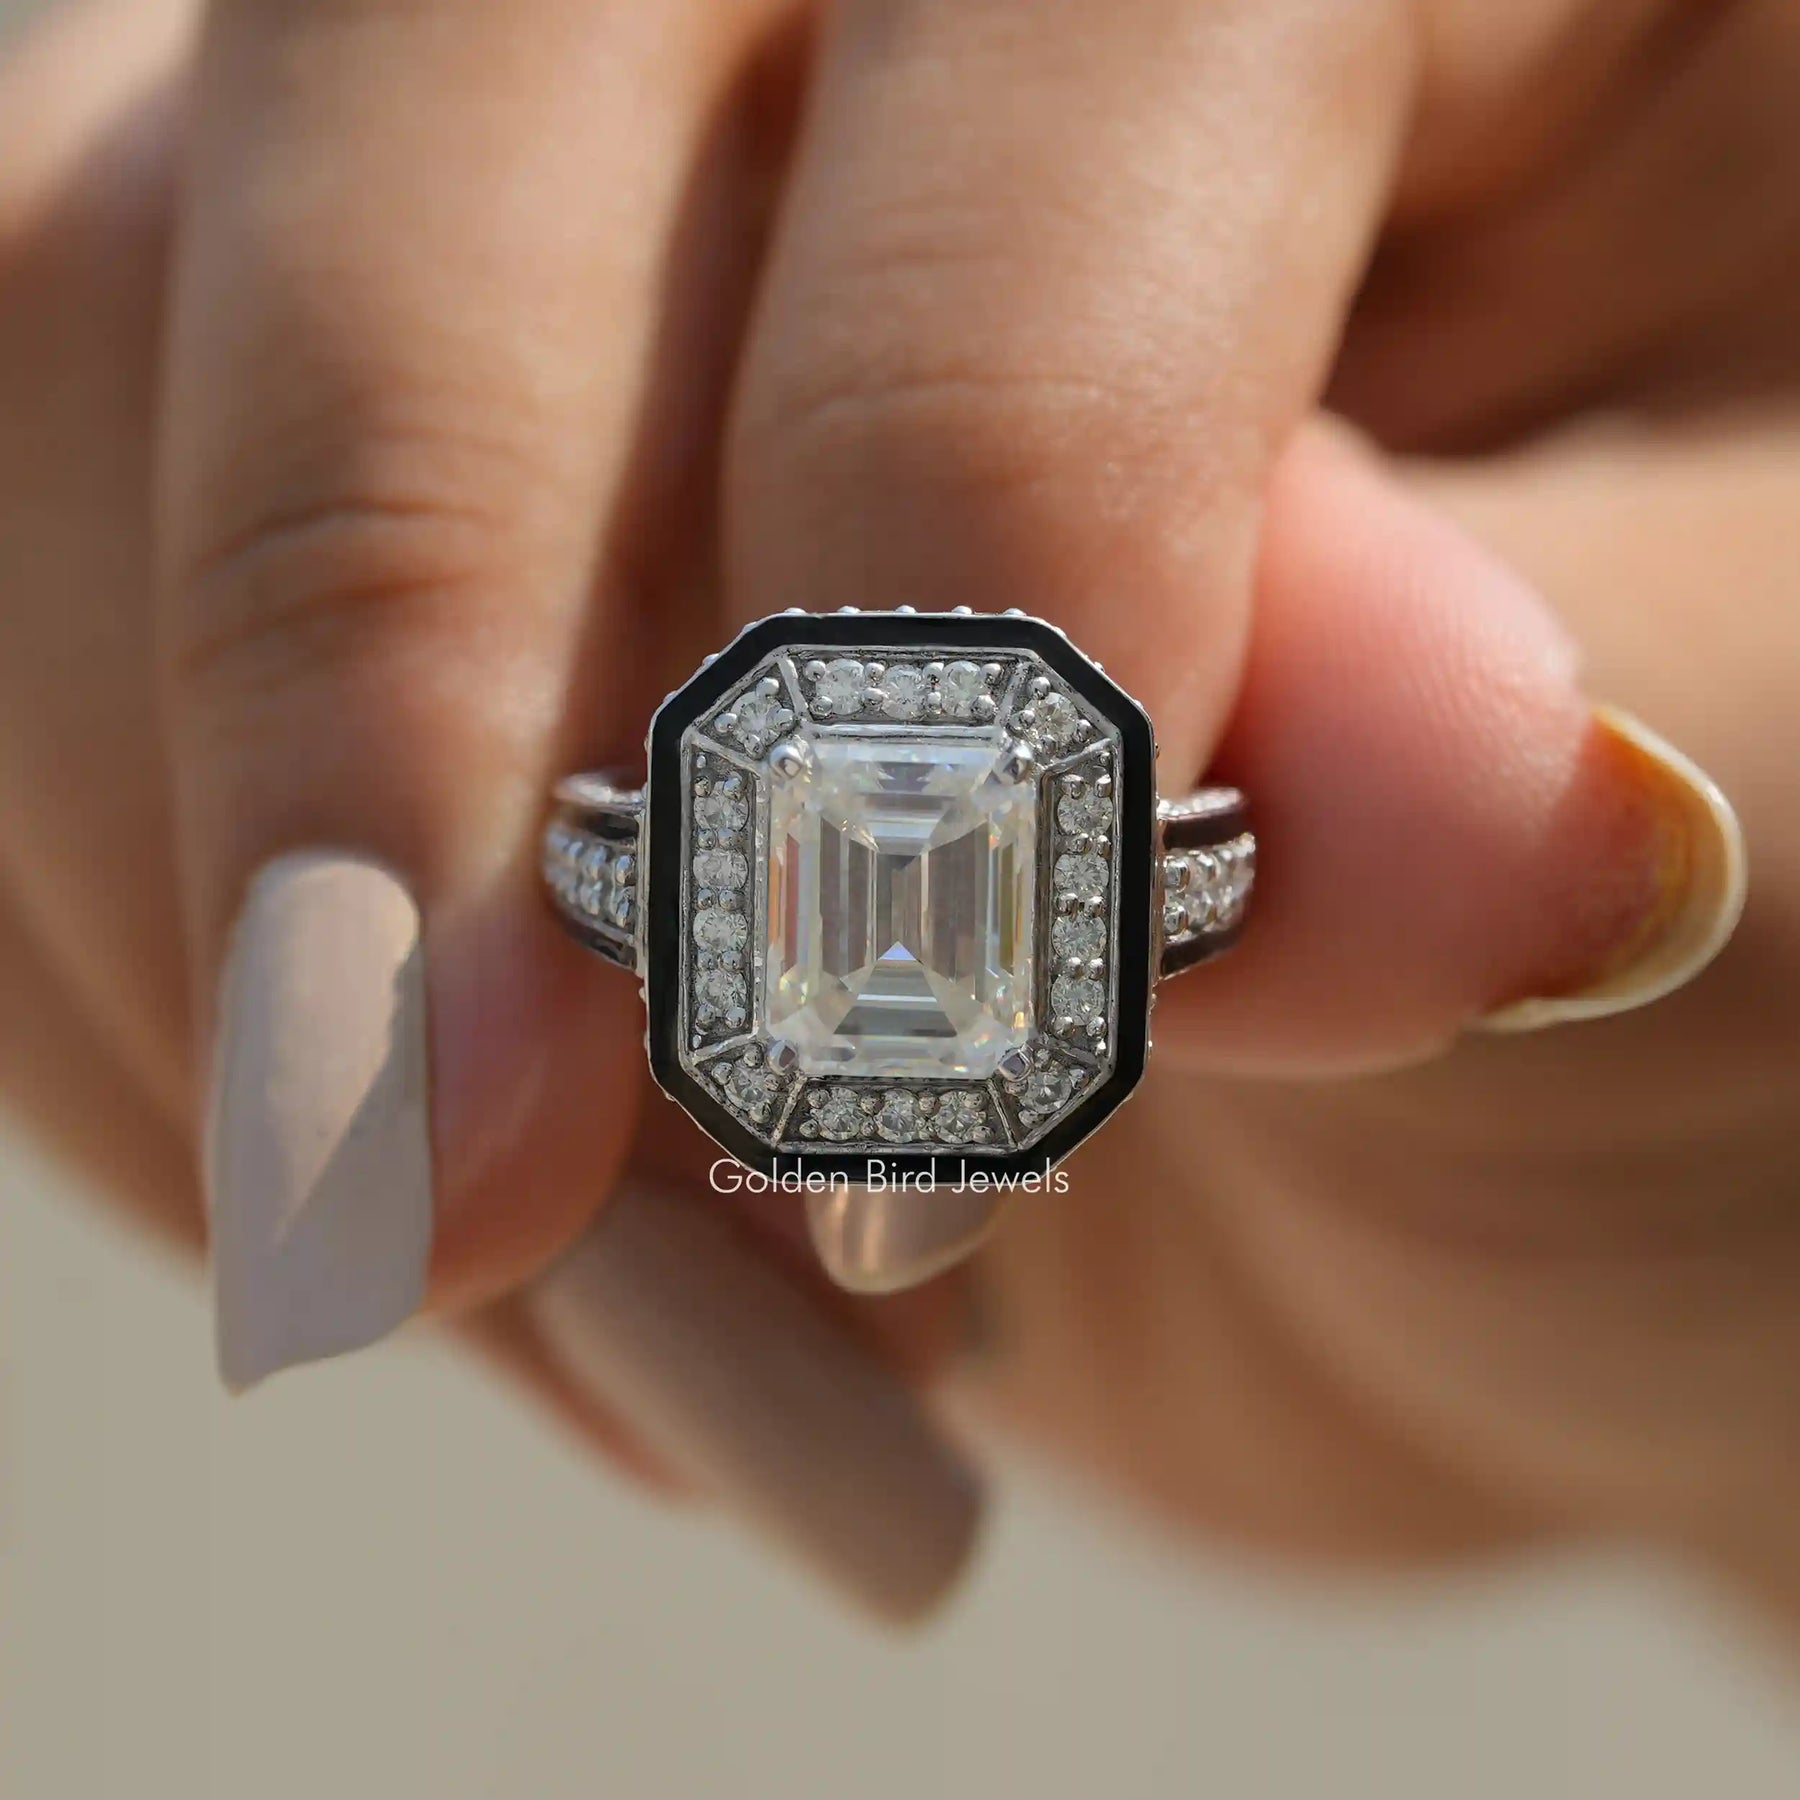 [Moissanite Emerald Cut Halo Engagement Ring Made In 18k White Gold]-[Golden Bird Jewels]